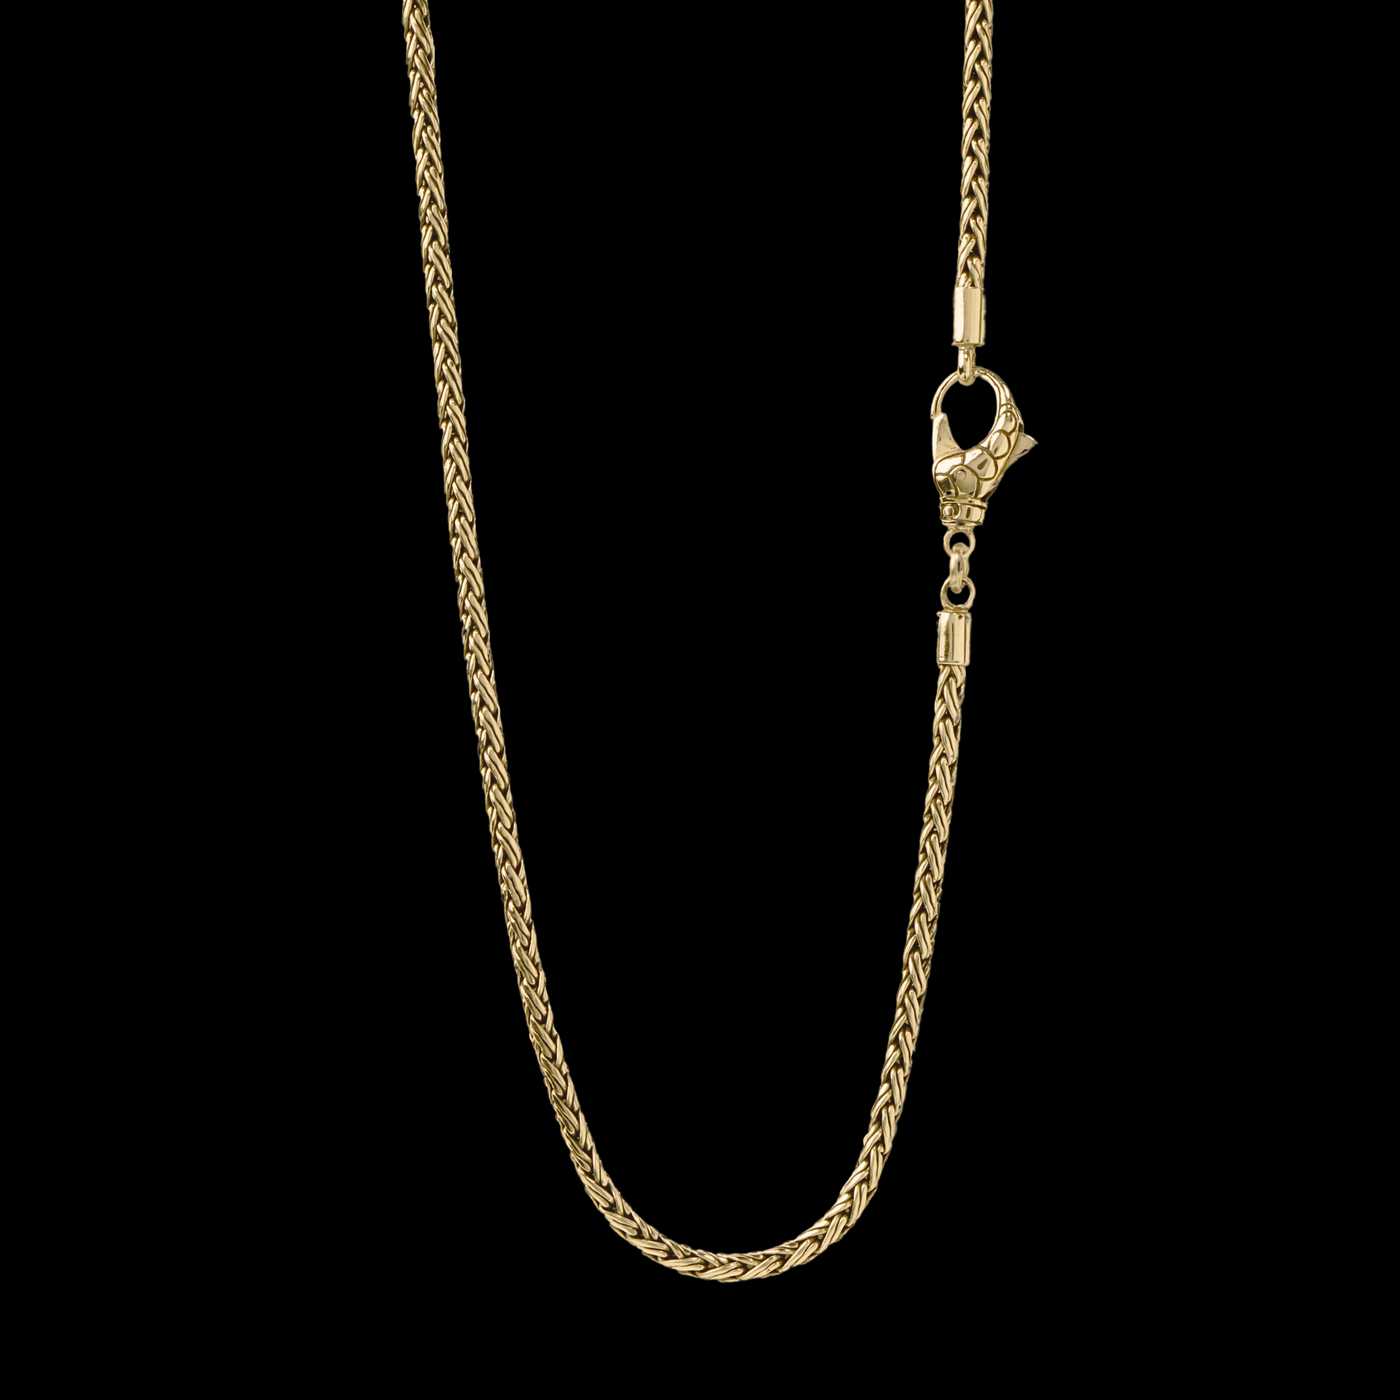 Bali 18k Yellow Gold Necklace (3 mm)